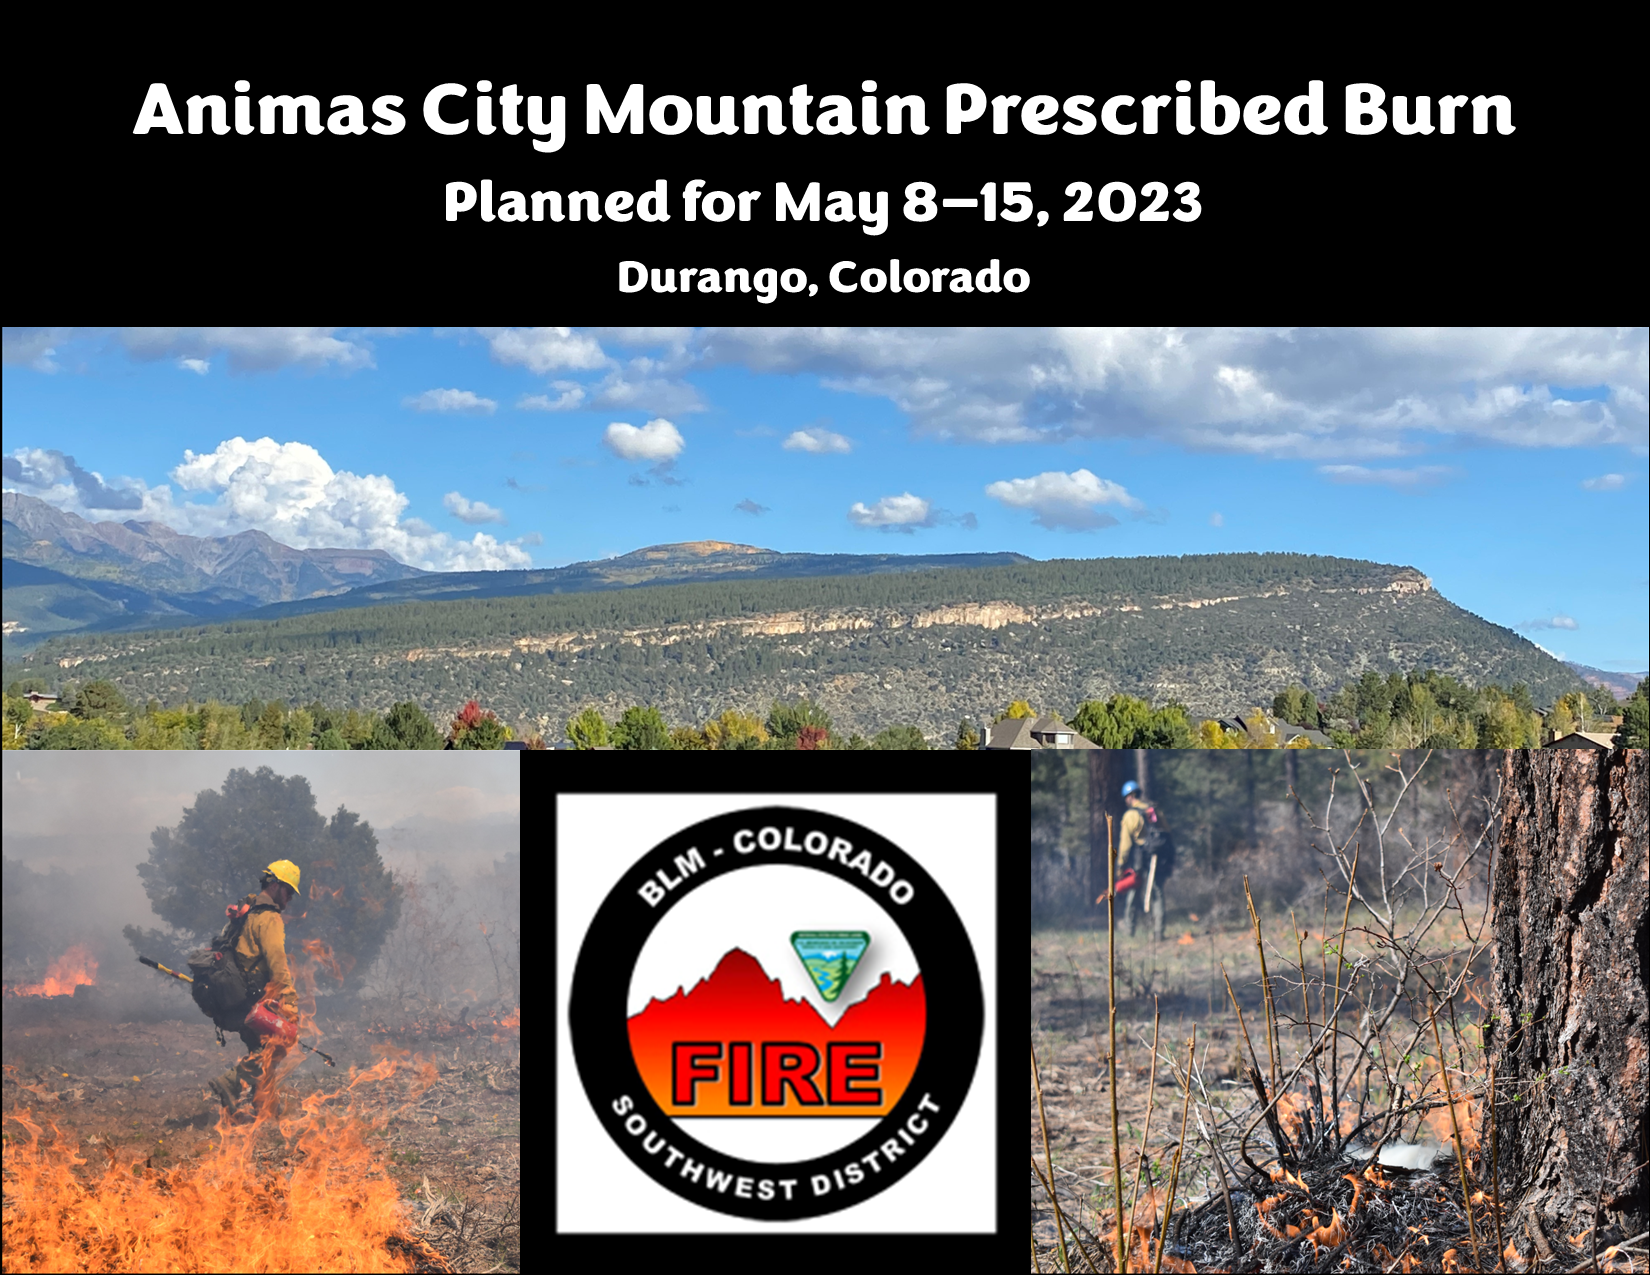 Image of two firefighters prescribe burning with Animas City Mountain in the background. Text - Animas City Mountain Prescribed Burn Planned May 8 - May 15, 2023. Logo BLM Southwest District Fire and Aviation Management